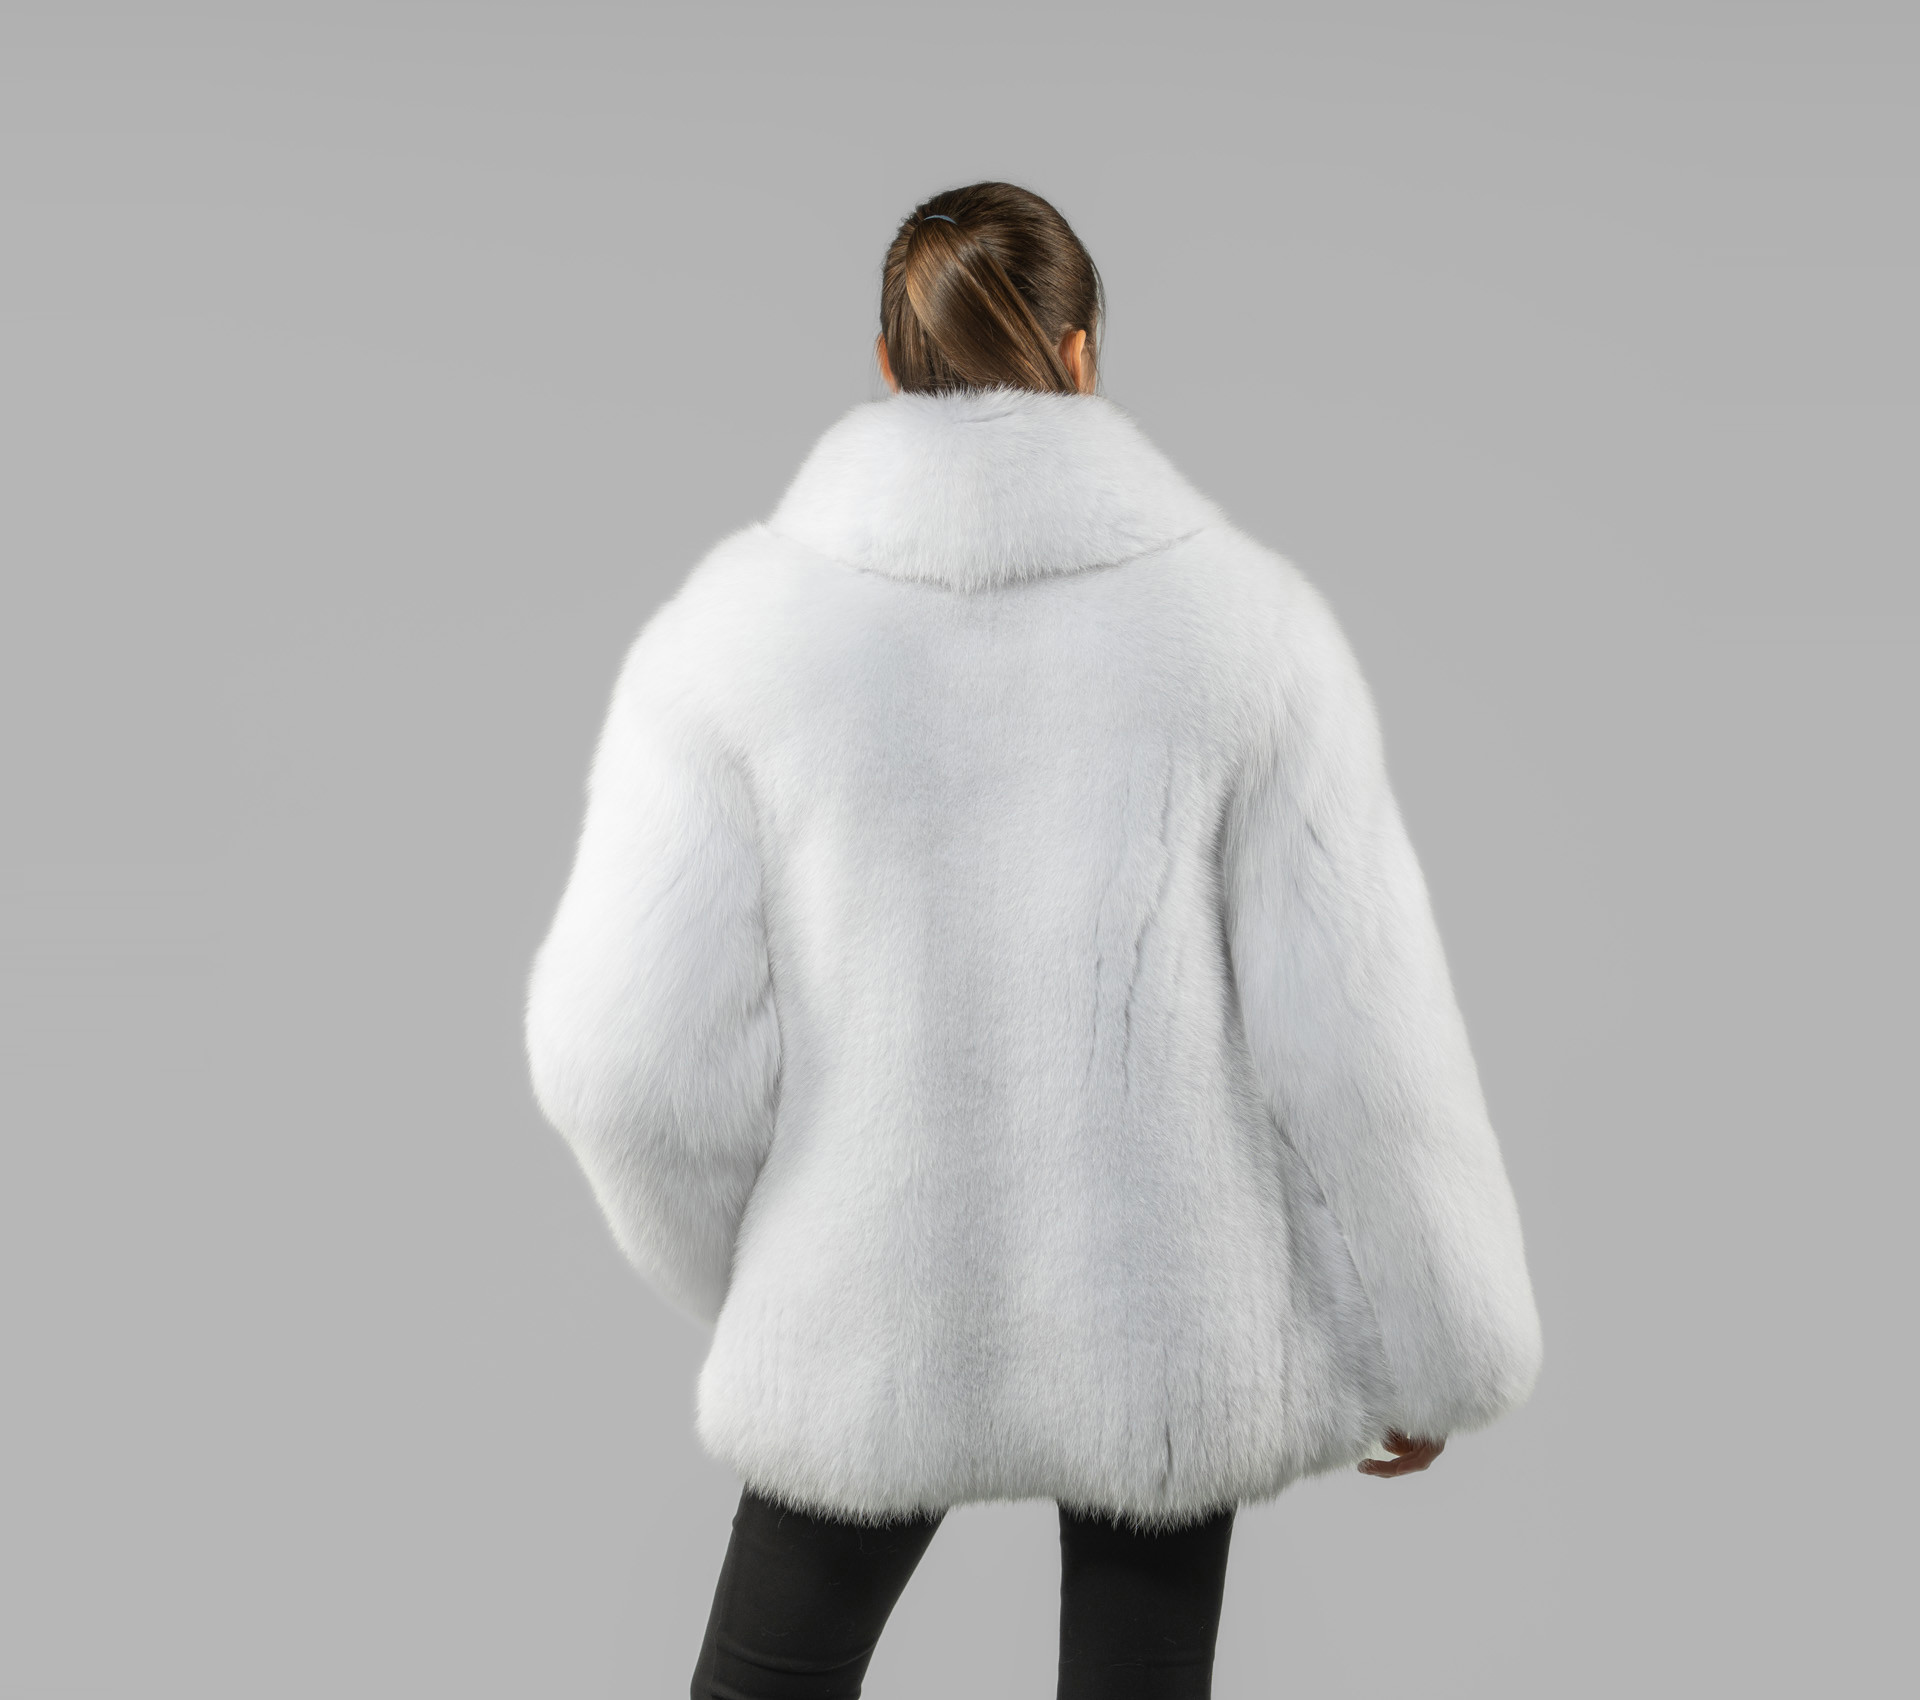 3 Things to Consider When Buying a Real Fur Coat